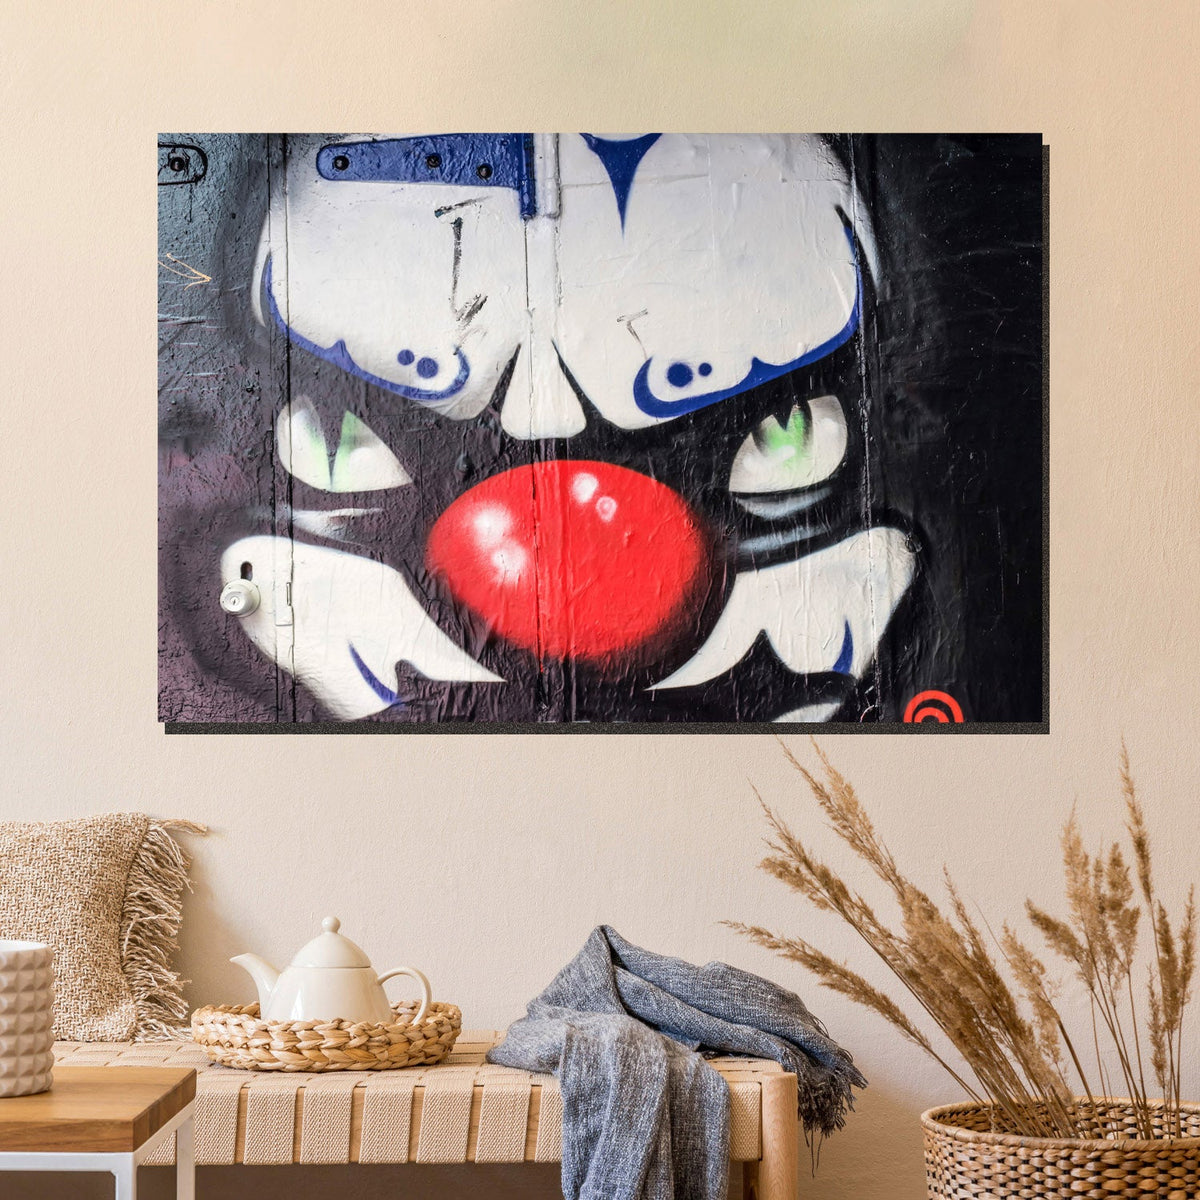 https://cdn.shopify.com/s/files/1/0387/9986/8044/products/TheClownCanvasArtPrintStretched-2.jpg